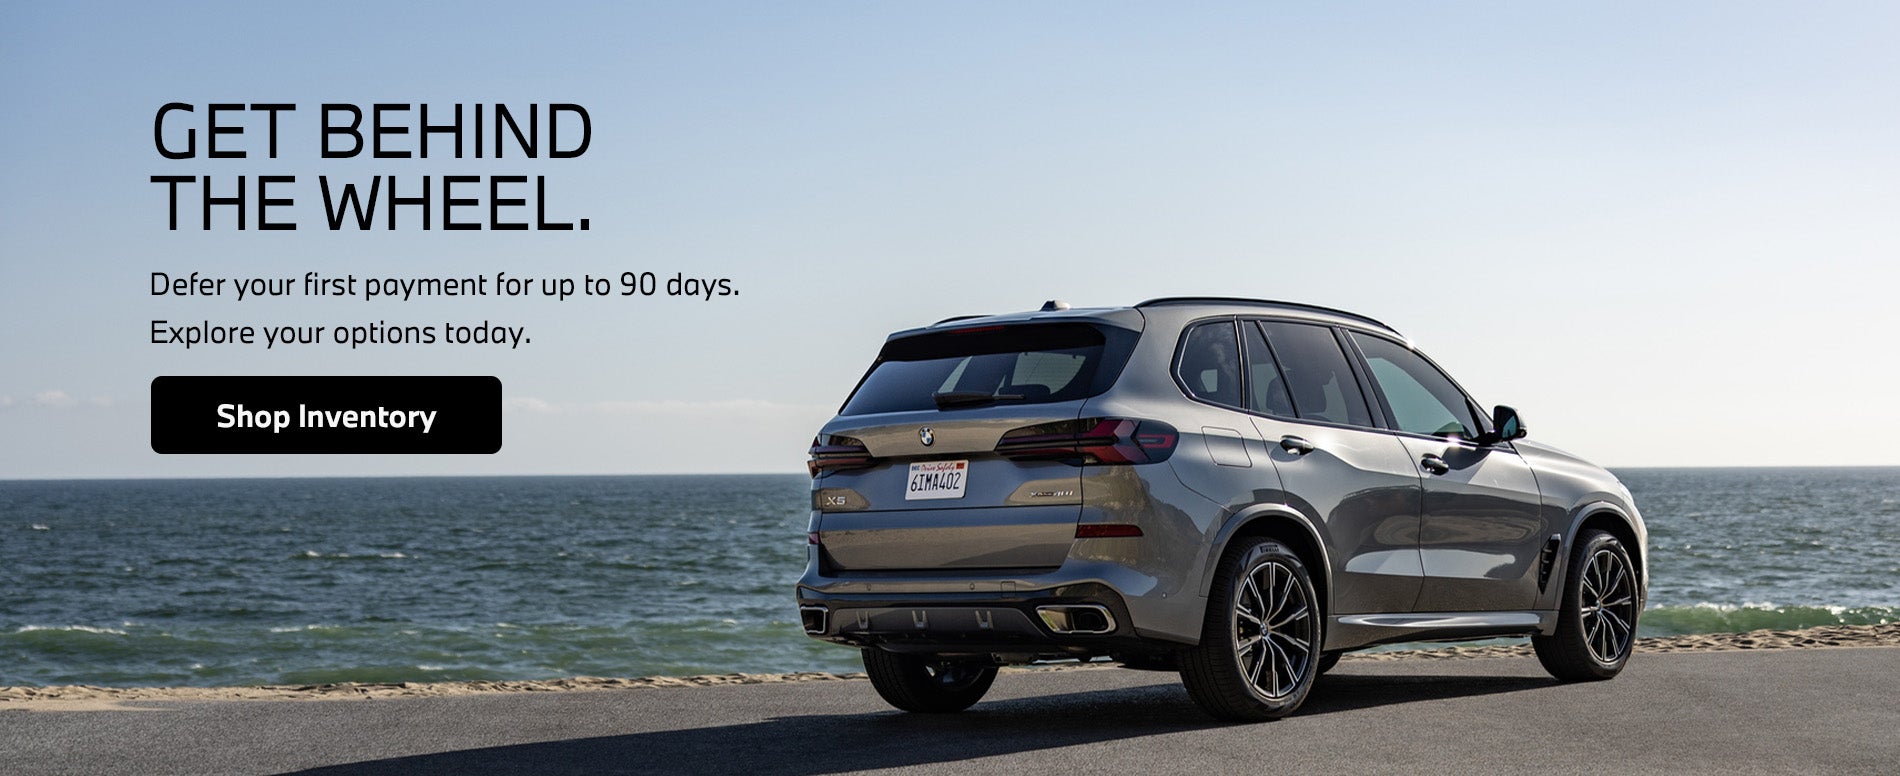 Get Behind the Wheel. Defer your first payment for up to 90 days. Explore your options today.